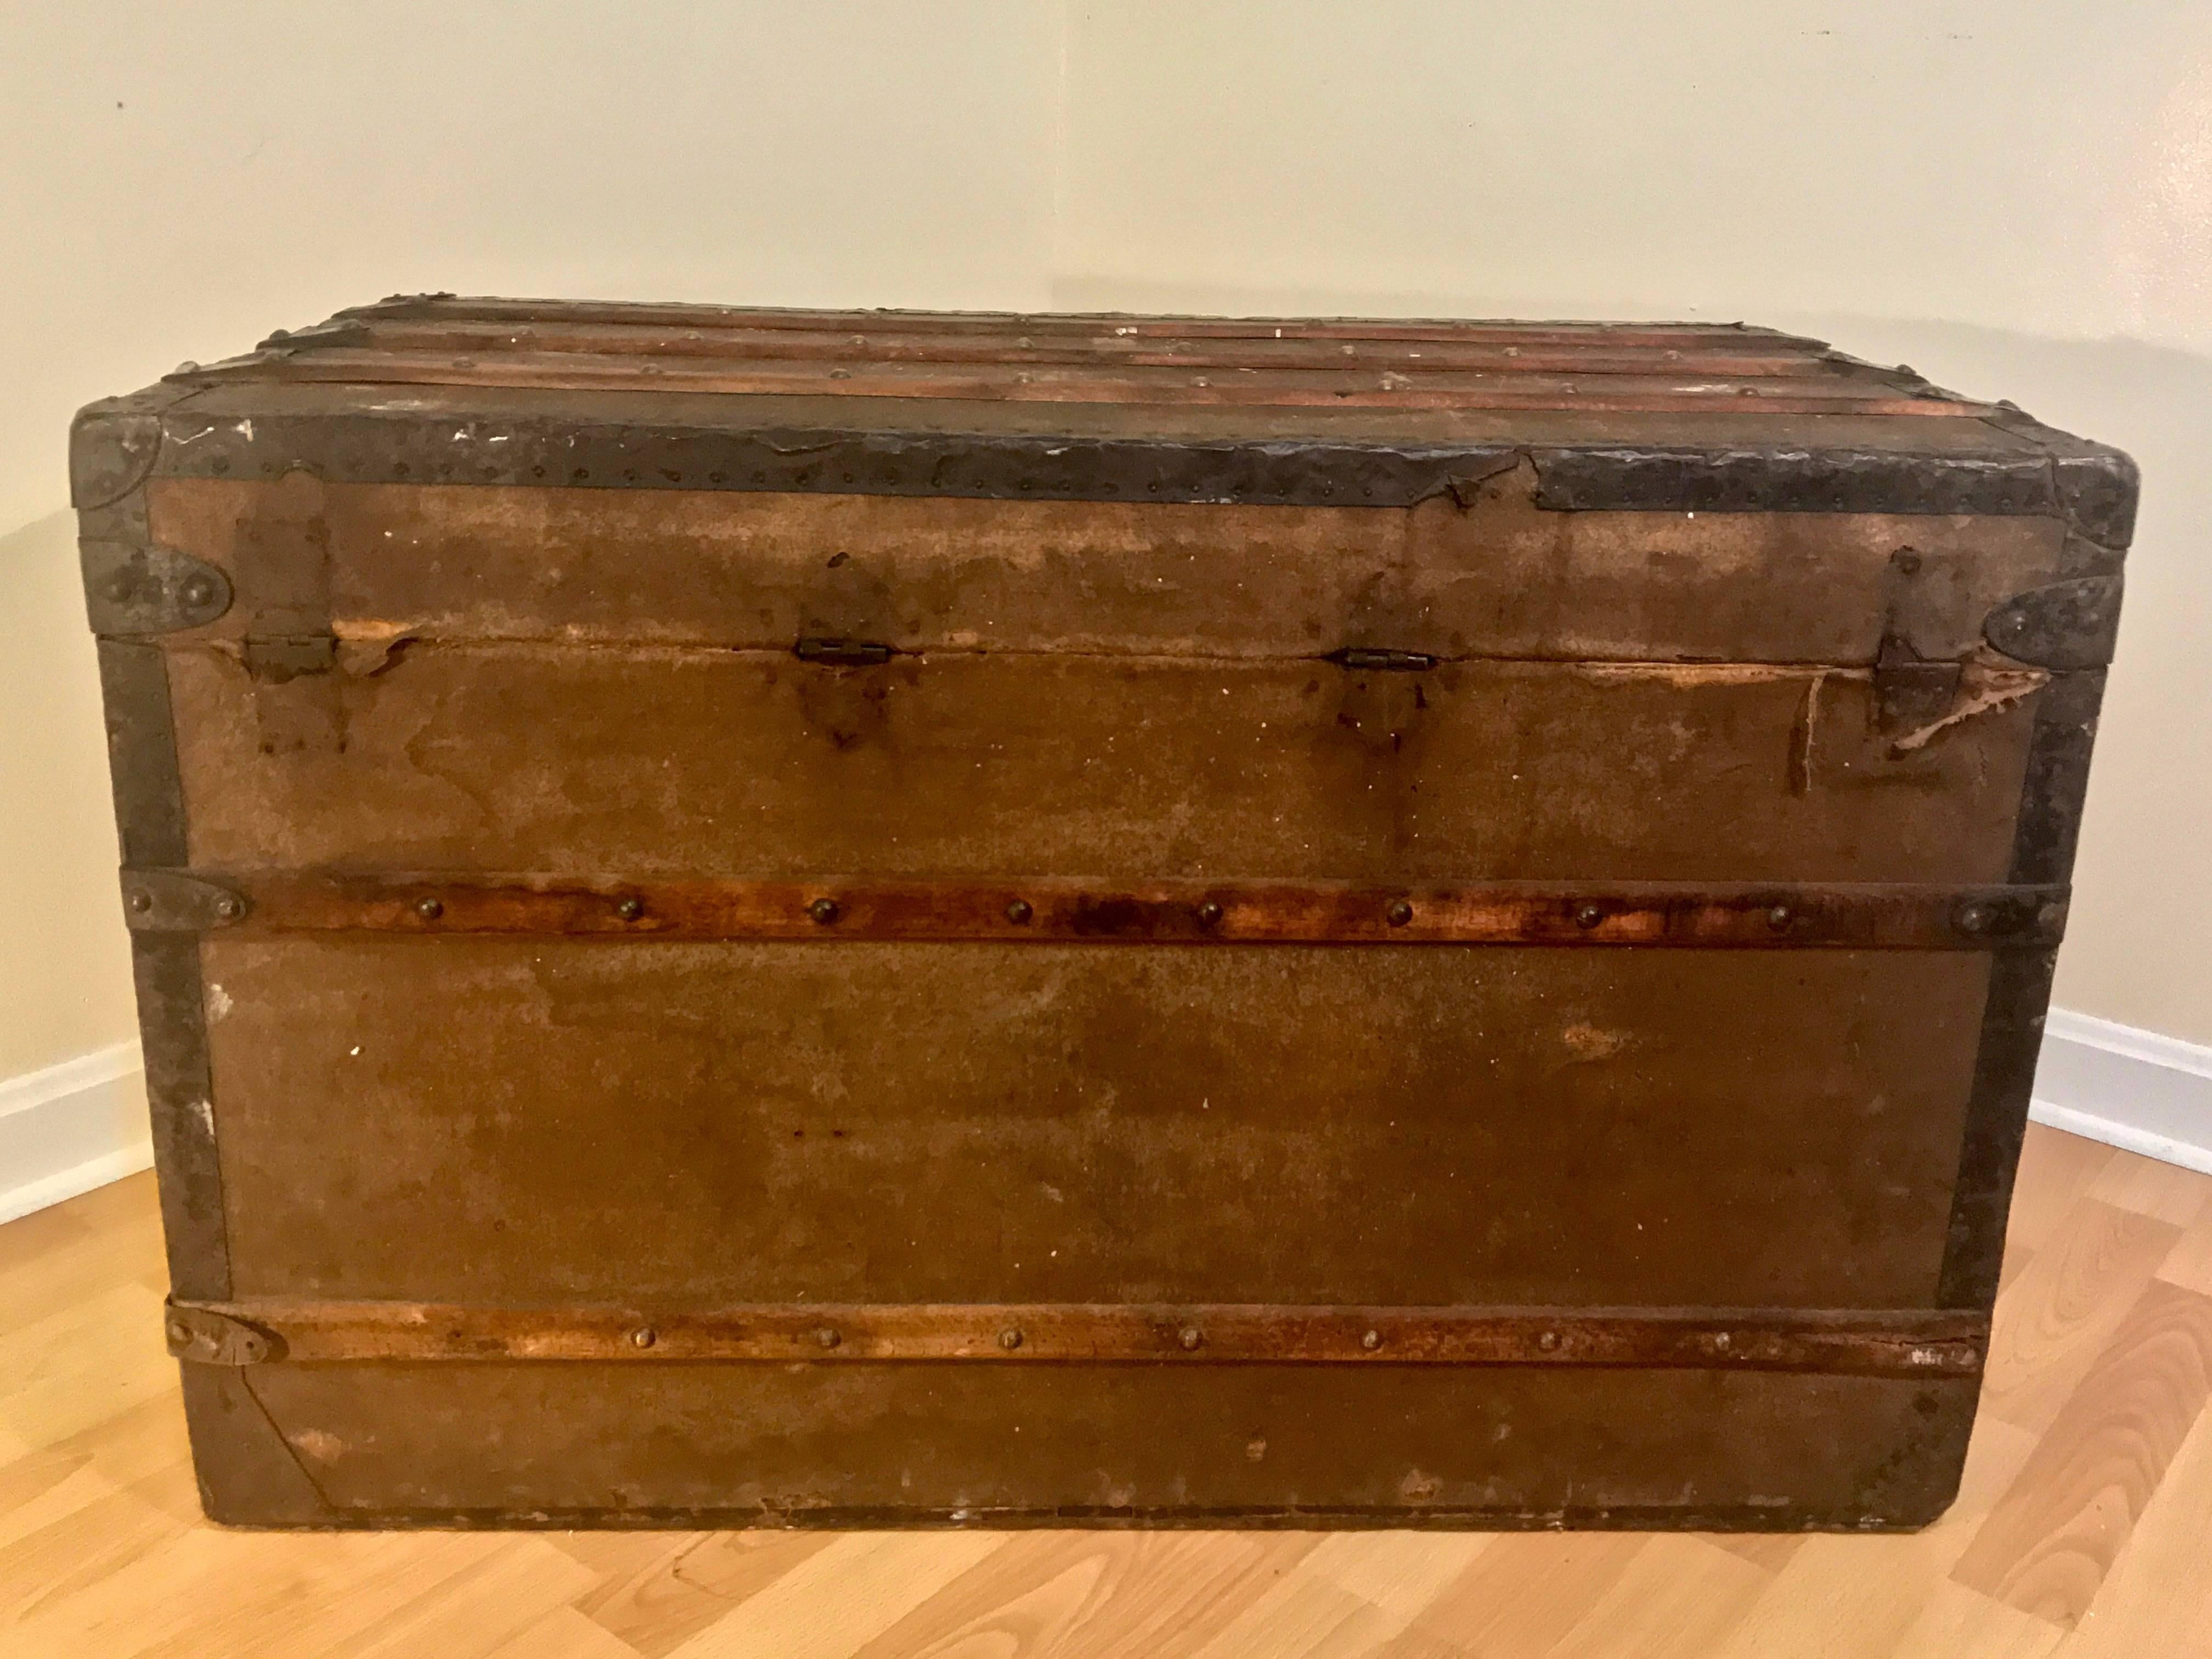 Louis Vuitton canvas steamer trunk, circa 1880 serial #49779 with “A.M Boston” painted on both sides. Front lock similar to LV, but not an original. Interior shelving are not present and some interior ribbon is missing. Top portion appears to have